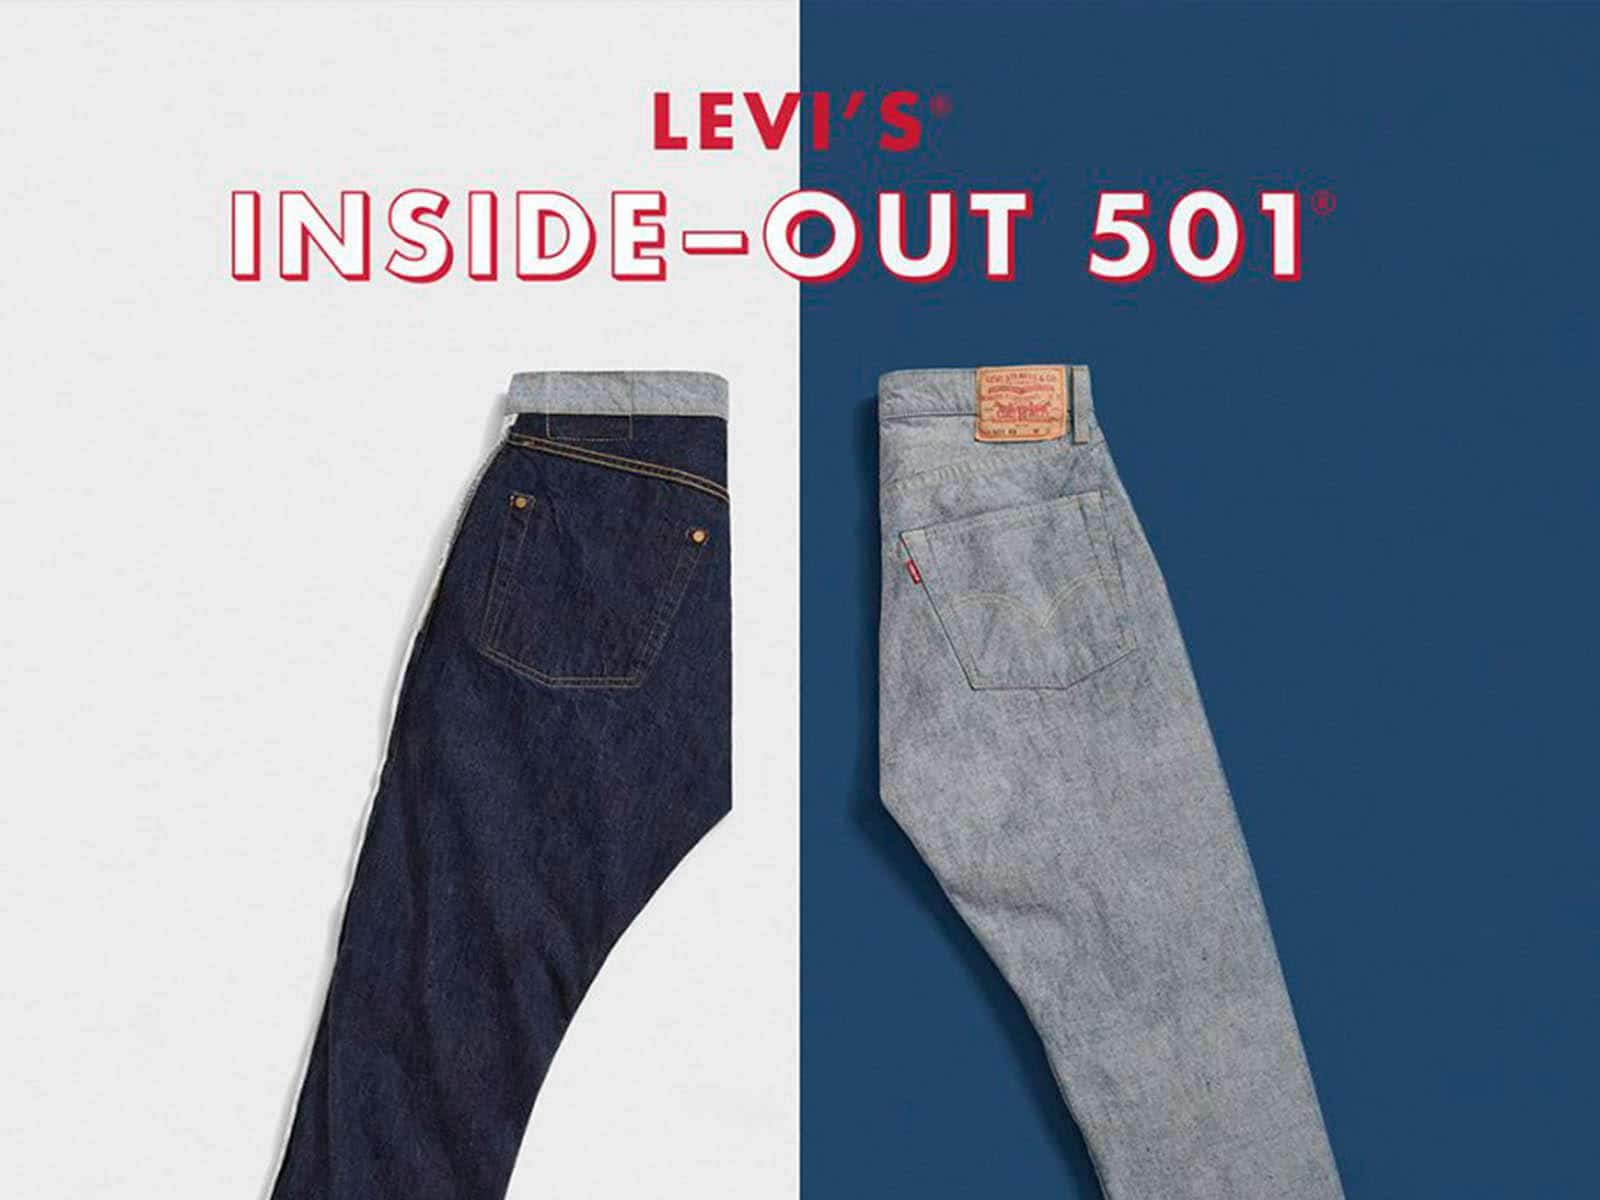 Levi’s Vintage Clothing turns its 501s inside out